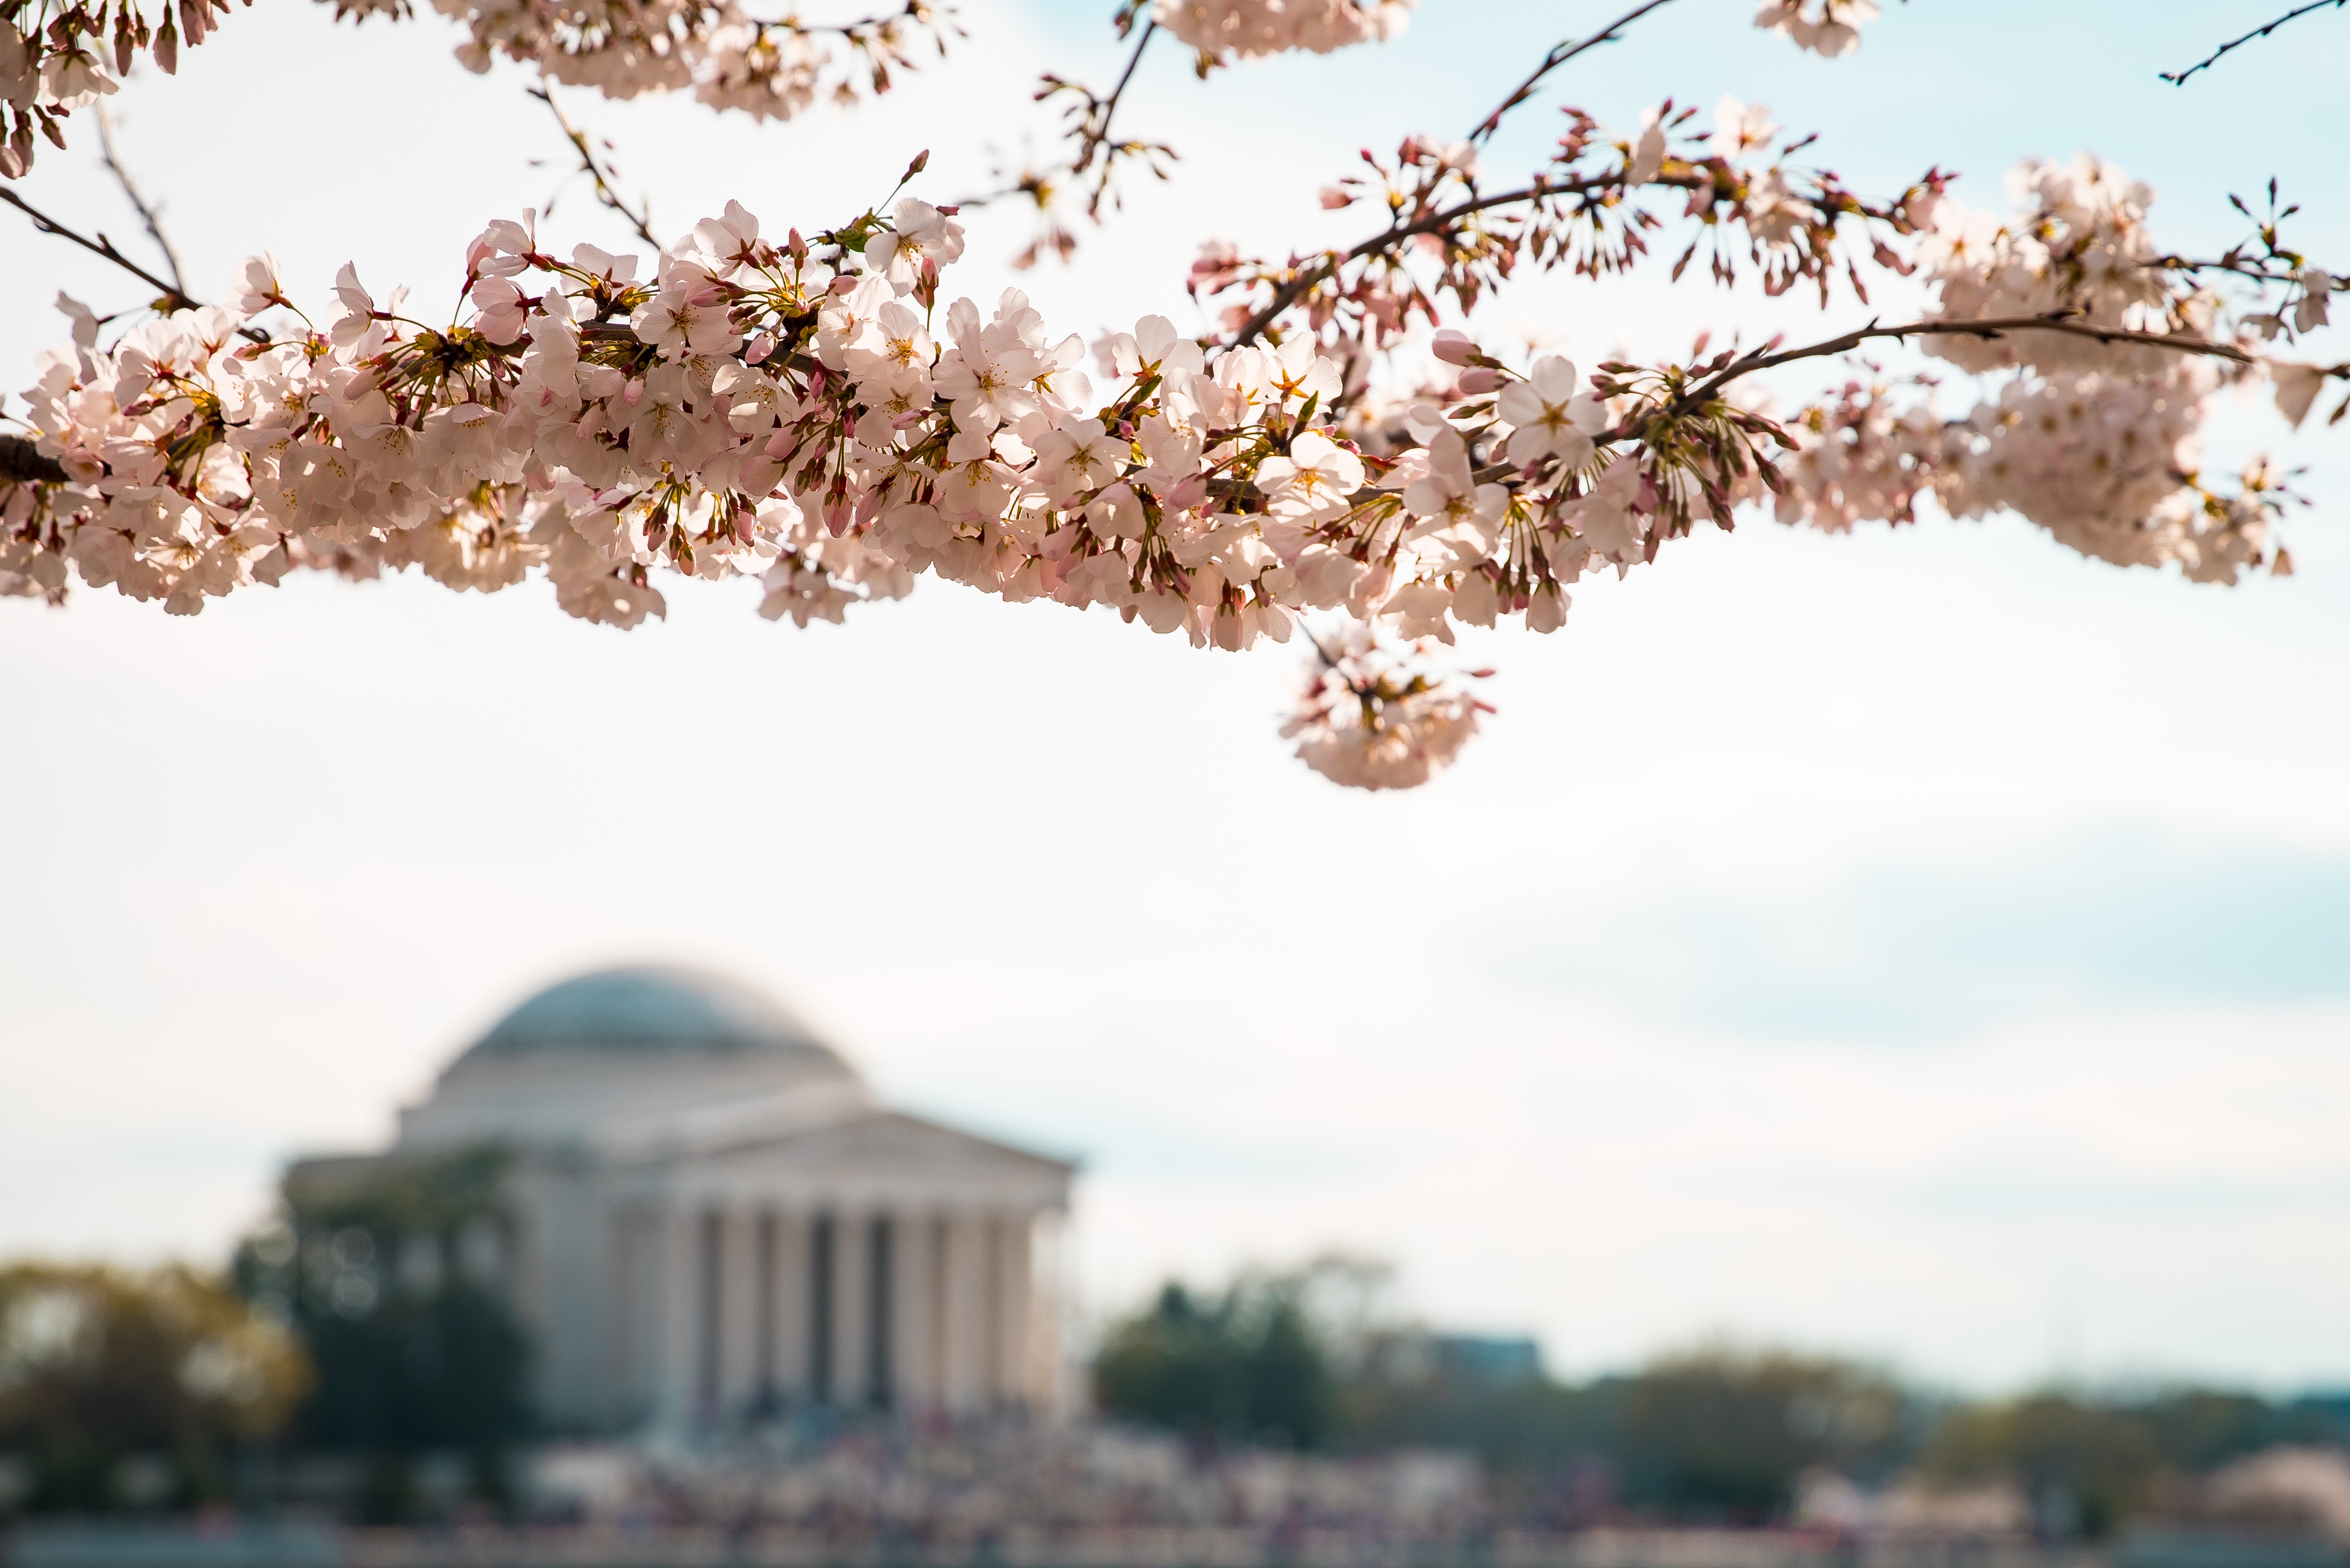 Cherry blossoms in Washington, D.C., with the National Mall in the background.